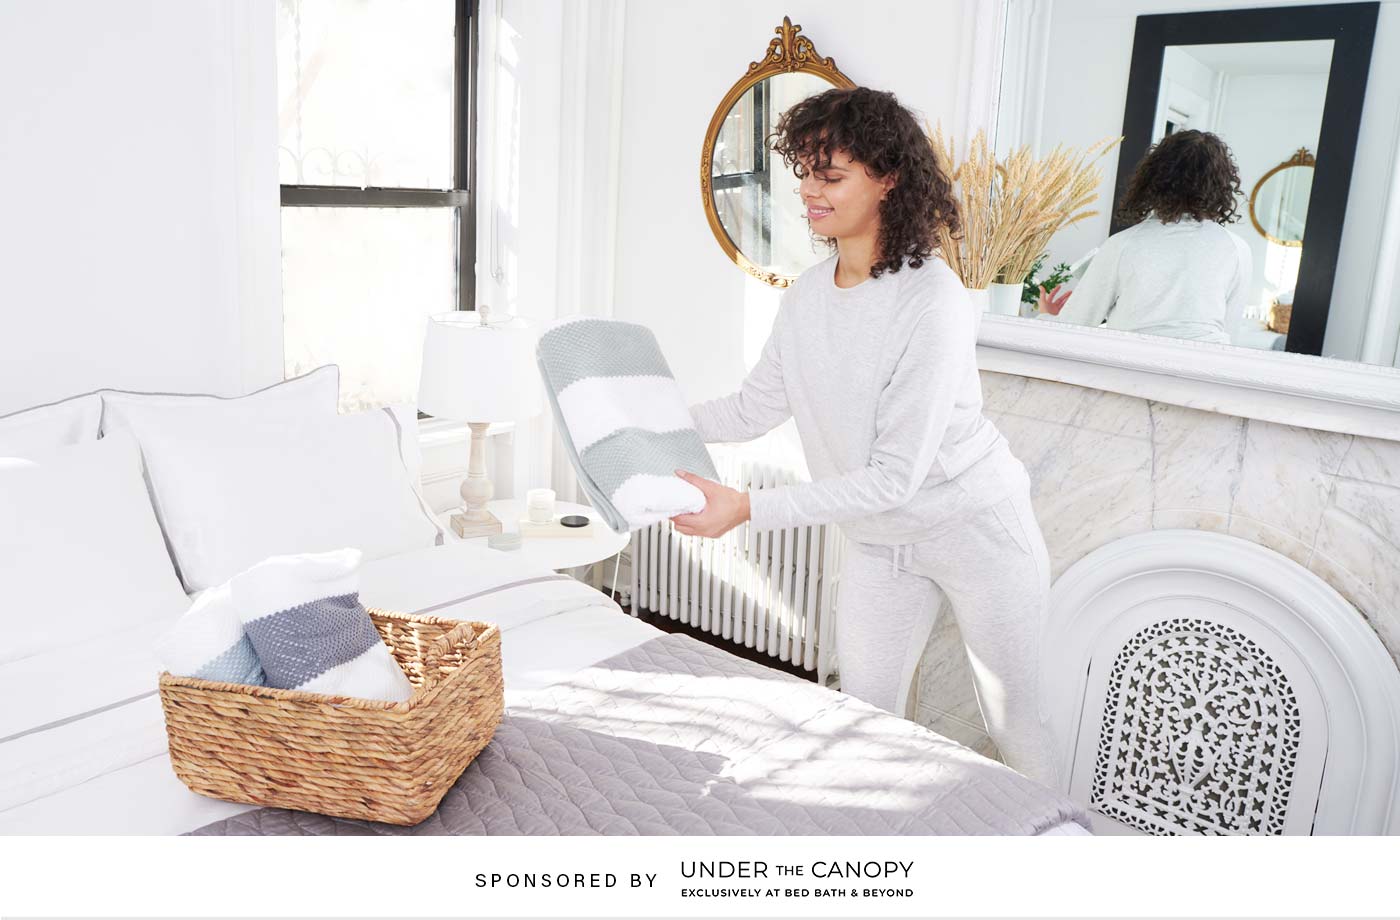 4 reasons to switch to organic linens, because your bed deserves nice things, too